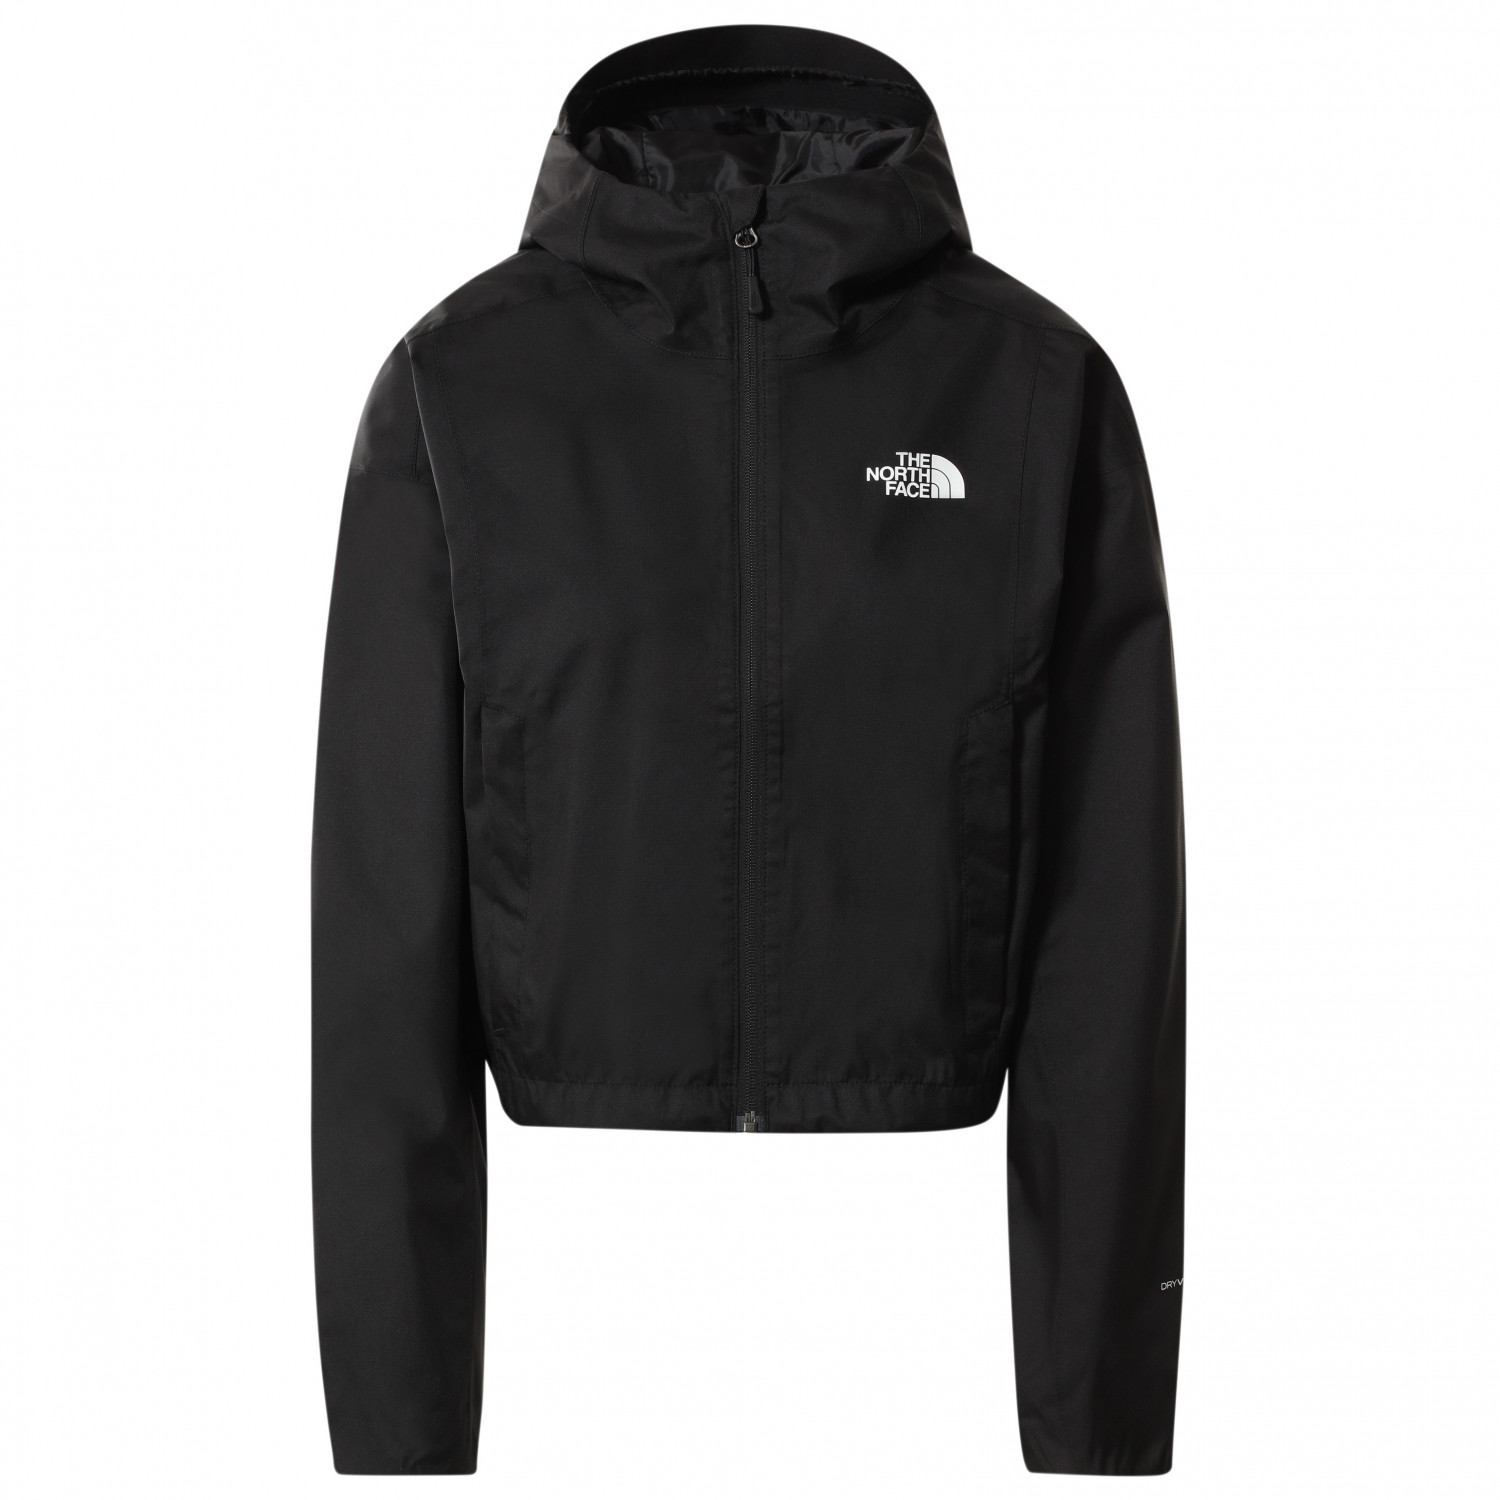 Дождевик The North Face Women's Cropped Quest, цвет TNF Black куртка the north face quest insulated черный